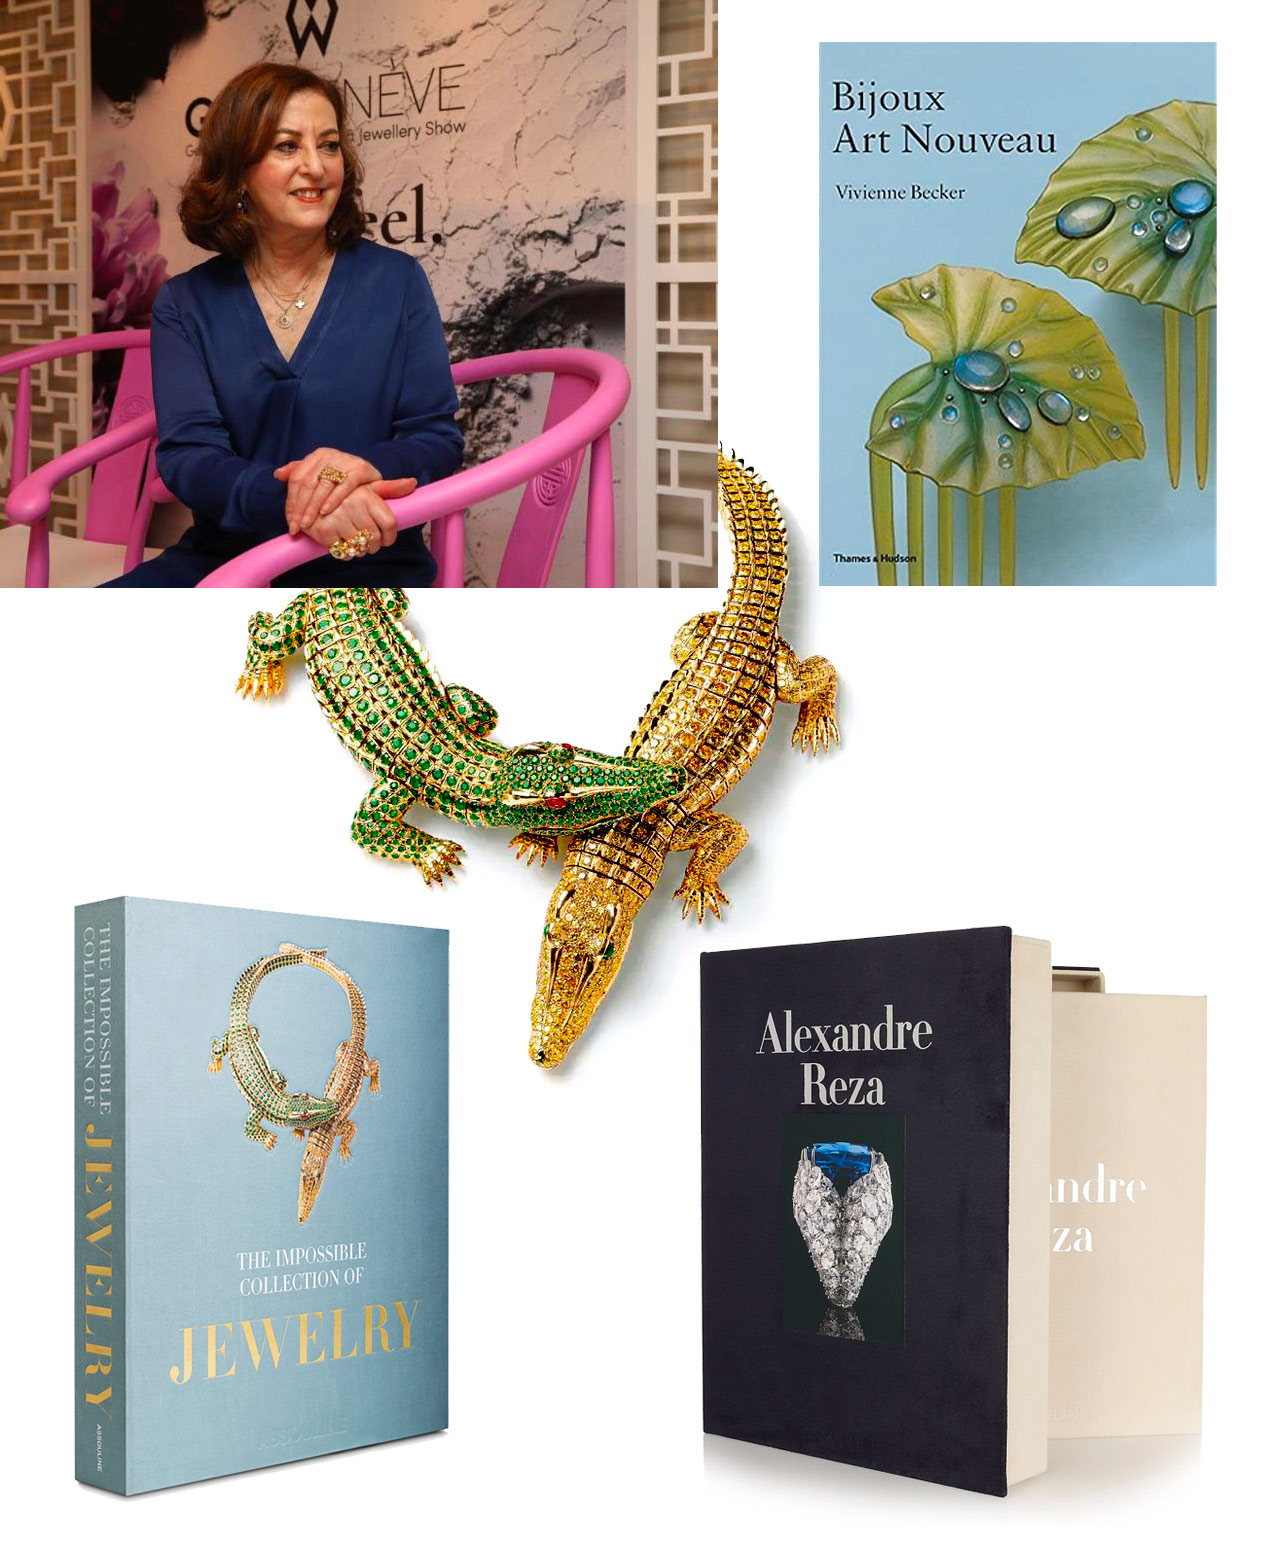 Vivienne Becker has written 25 books, including Art Nouveau Jewellery that is considered a milestone work on the subject